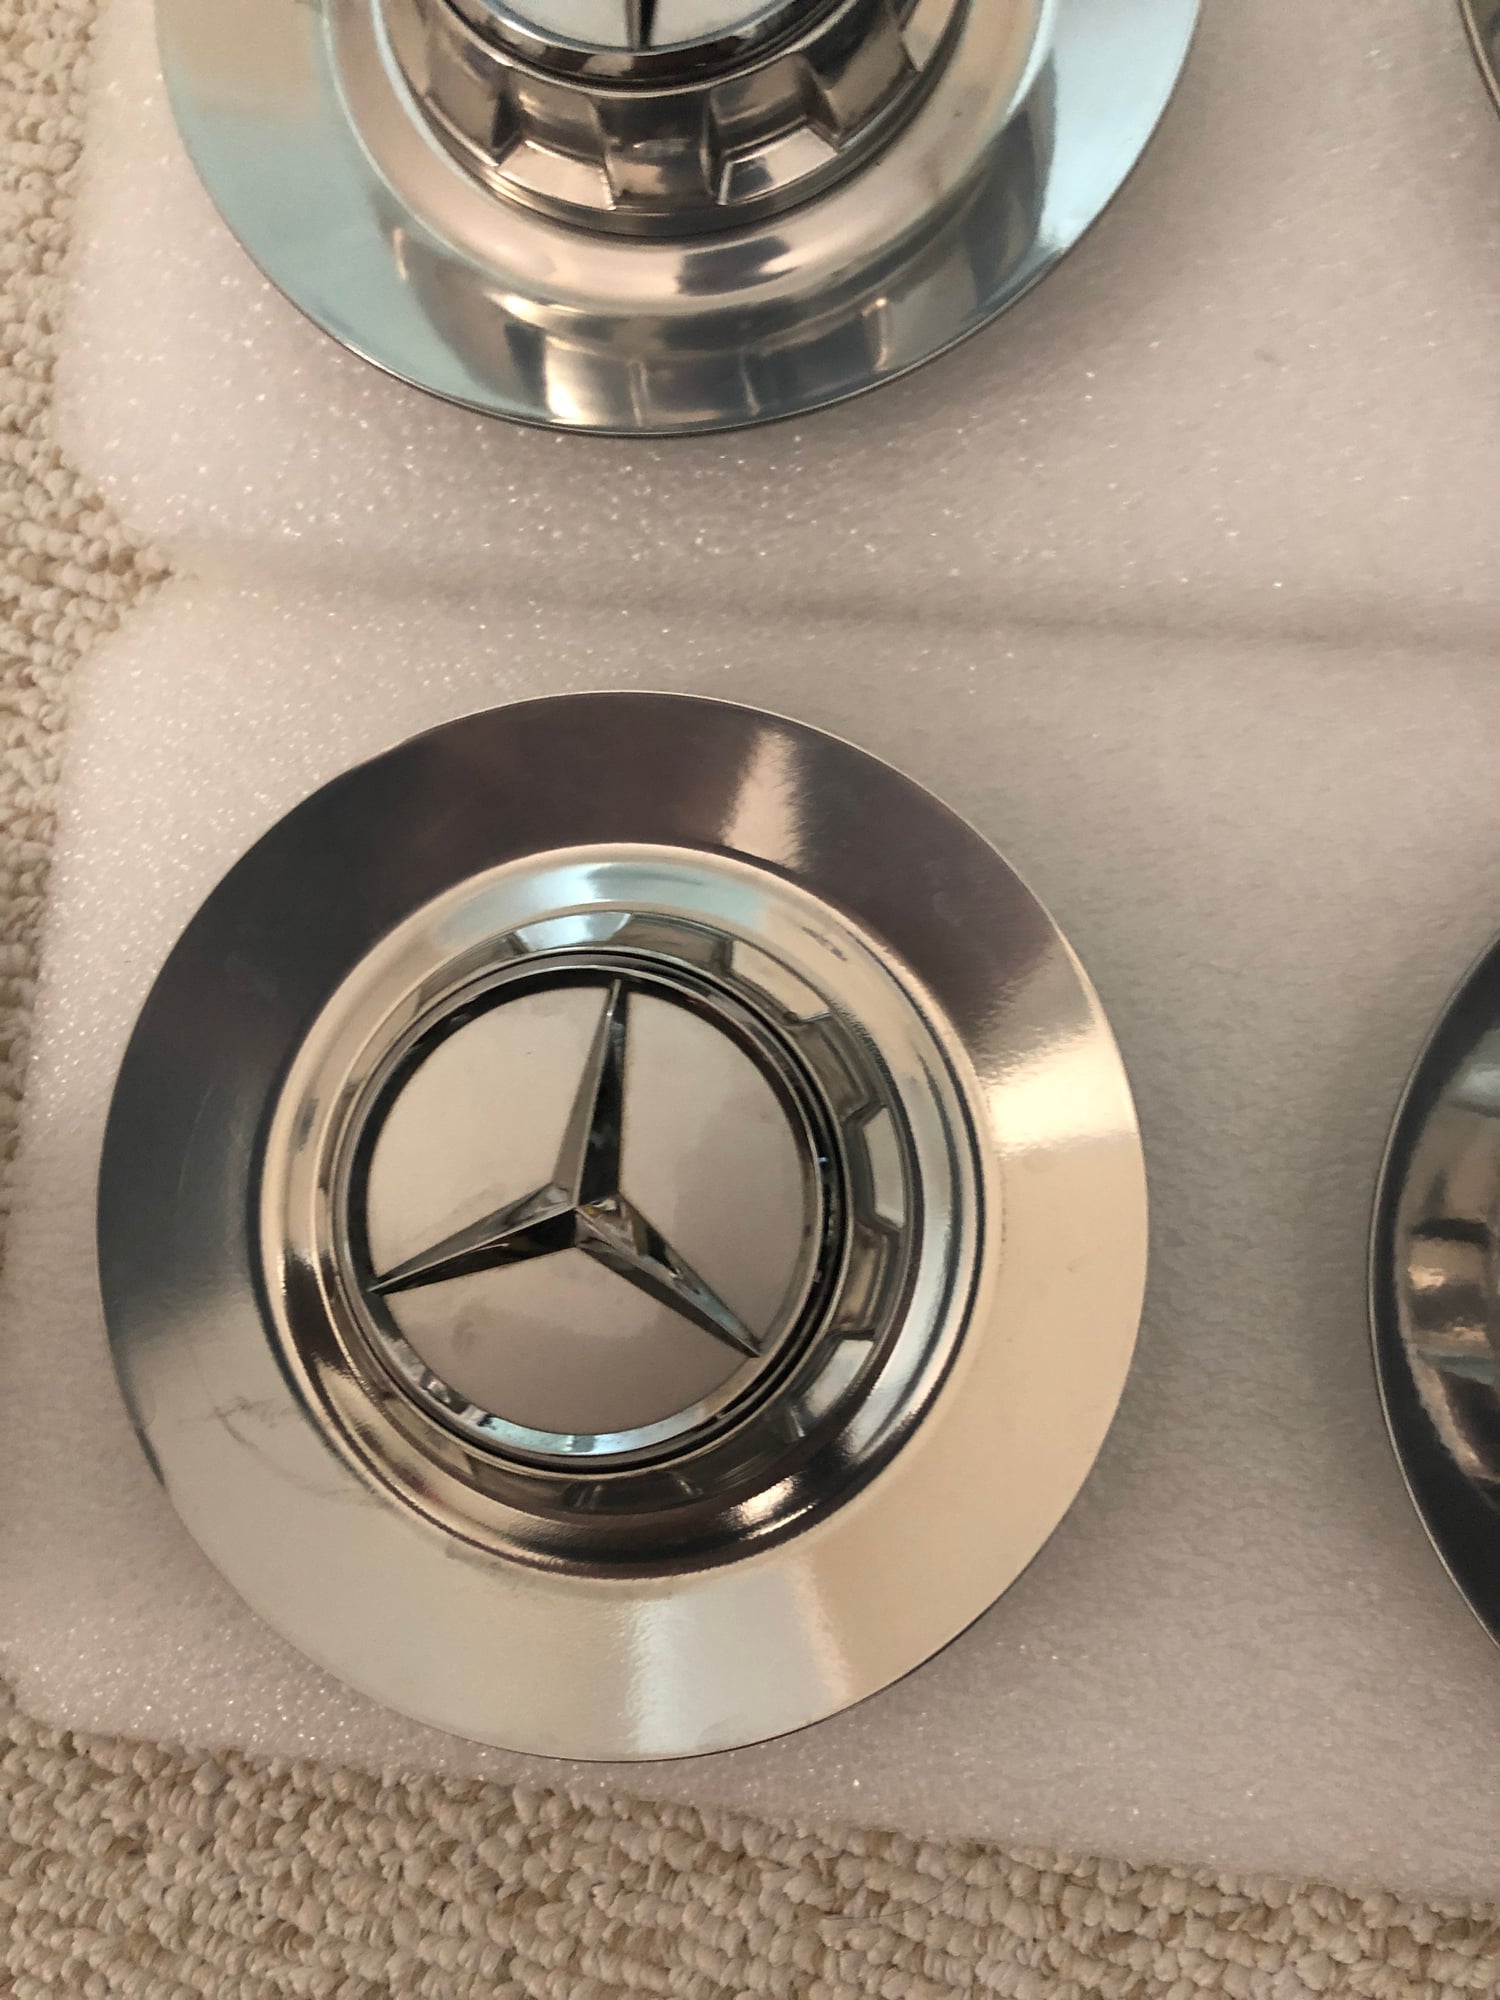 Wheels and Tires/Axles - For Sale: 4 OEM/Stock Chrome Hub Caps - Used - All Years Mercedes-Benz C63 AMG S - Chicago, IL 60056, United States